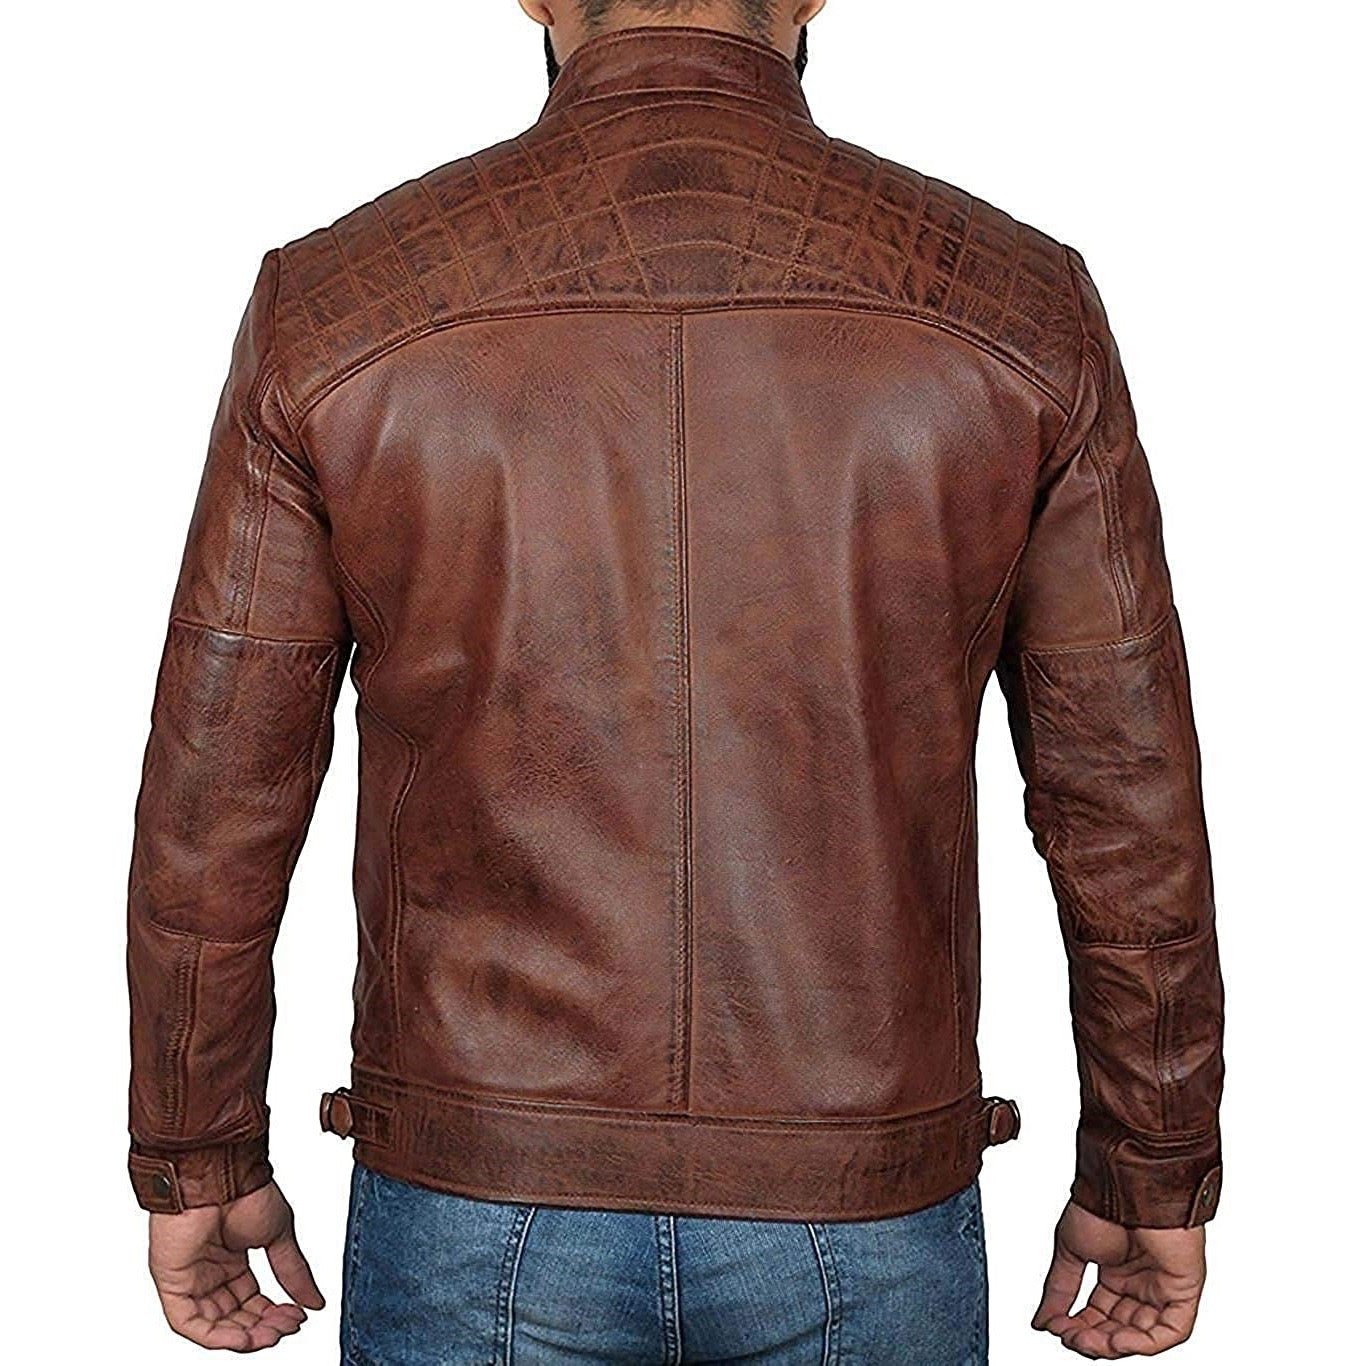 FHMO - Jacket for Men - Sarman Fashion - Wholesale Clothing Fashion Brand for Men from Canada